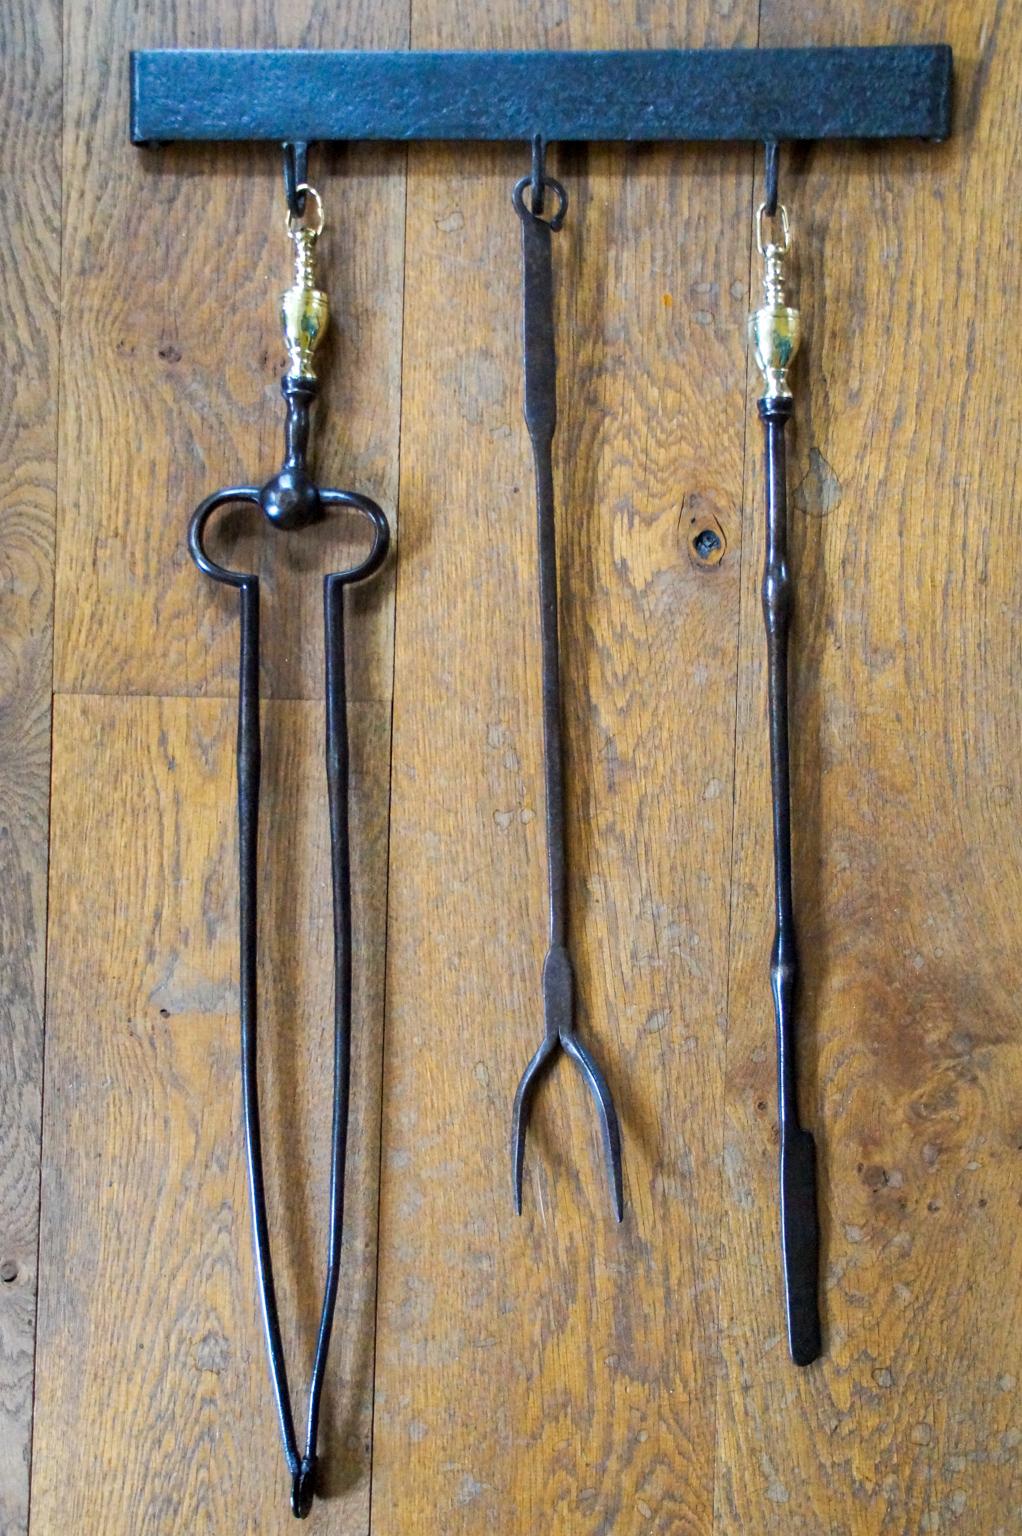 18th - 19th century Dutch Louis XV fireplace tool set consisting of fireplace tongs, a tasting fork, a poker and their hanger. The fire irons are made of wrought iron and the tongs and poker have polished brass handles. The hanger is also made of